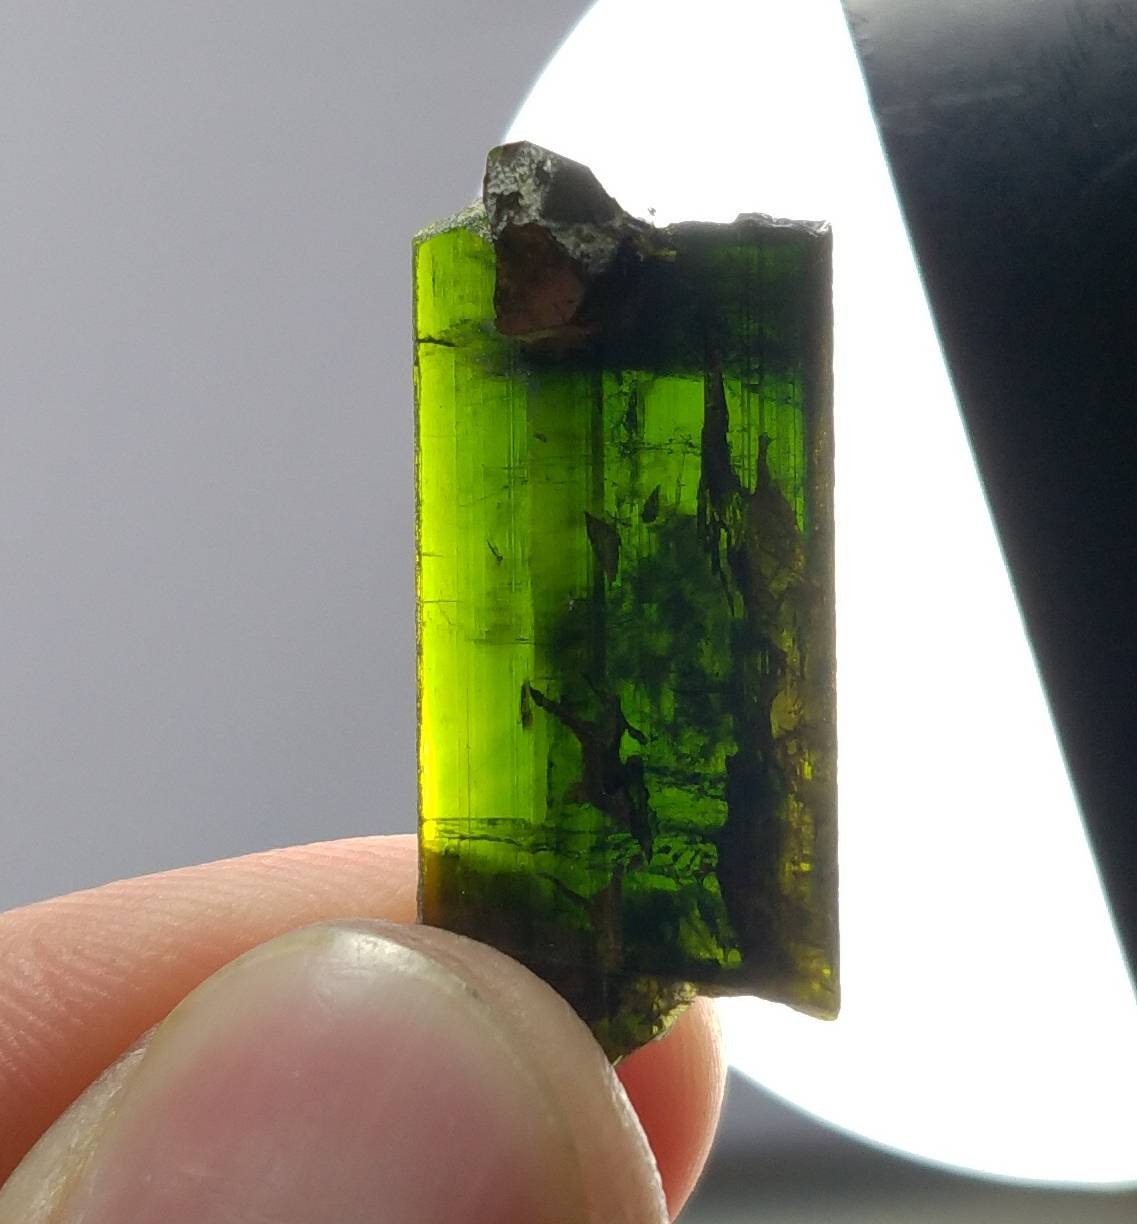 ARSAA GEMS AND MINERALSNatural clear aesthetic 3.7 gram Beautiful perfectly terminated etched pleochroic  epidote crystal - Premium  from ARSAA GEMS AND MINERALS - Just $25.00! Shop now at ARSAA GEMS AND MINERALS